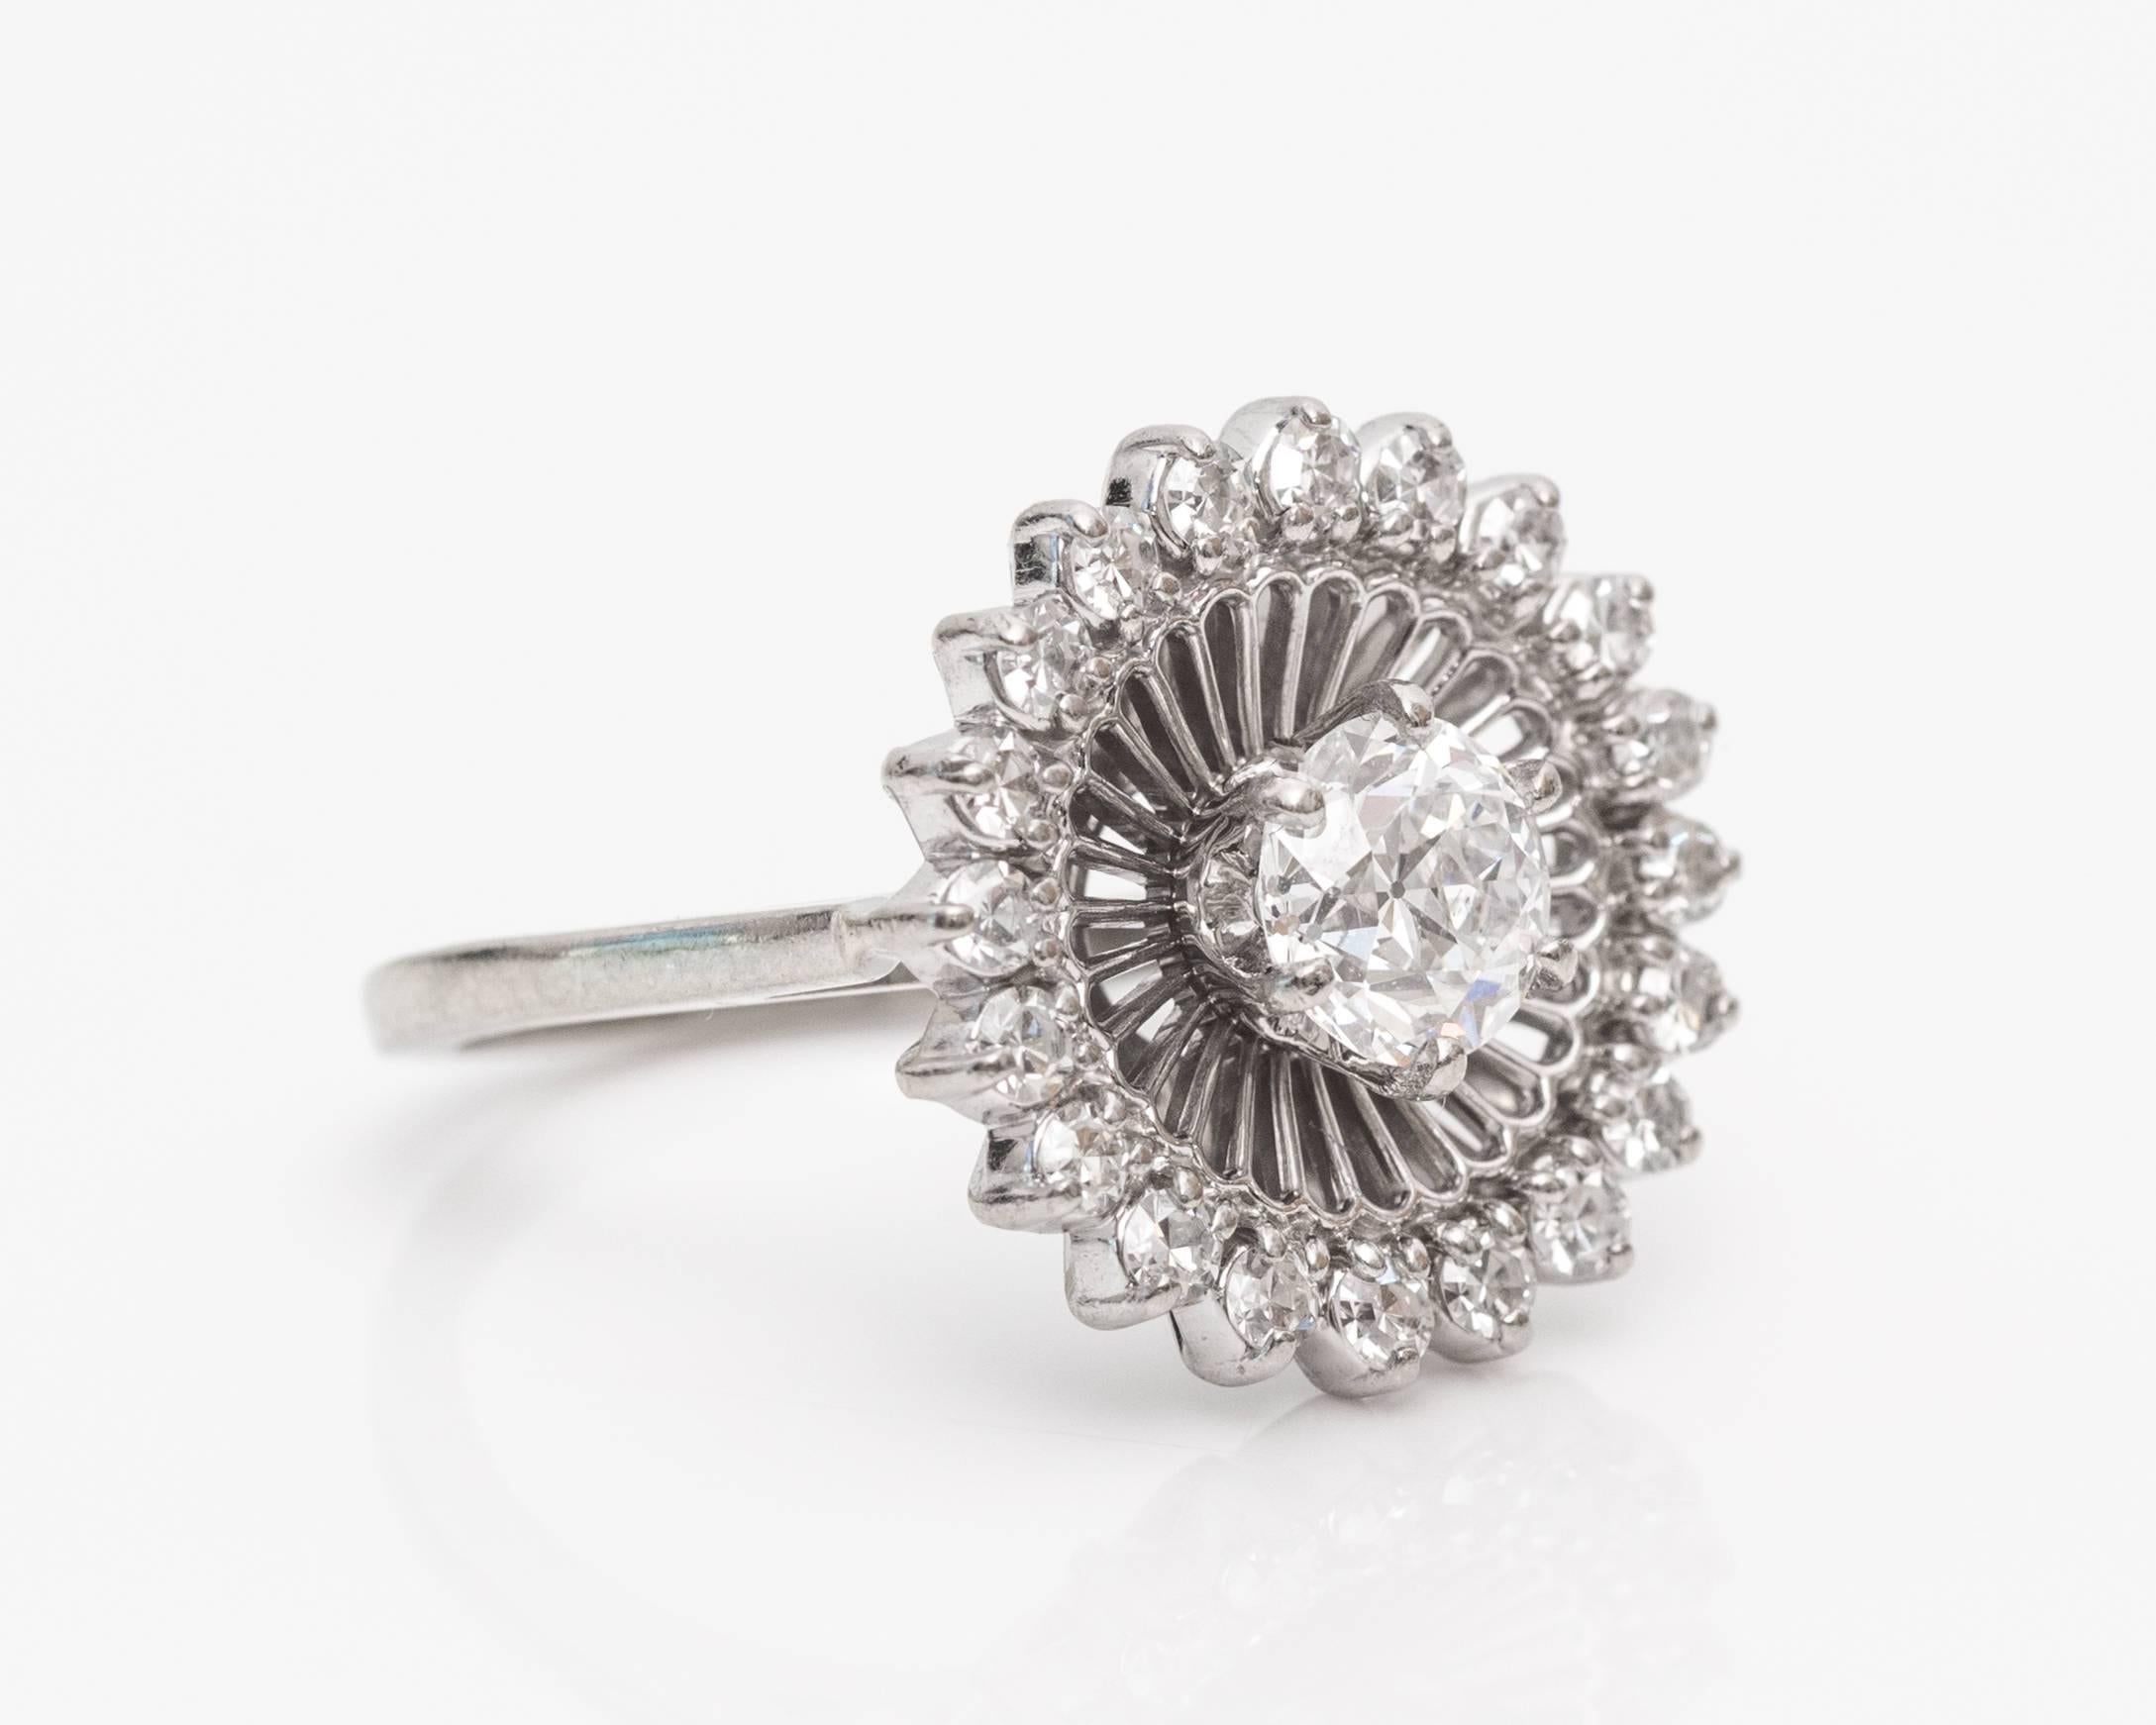 1910s Art Nouveau .70 Carat Old Mine Diamond Platinum Halo Cocktail Ring features Traditional white-on-white look with a large old mine diamond in the middle. This is mounted in a six-prong with a fan-like frame extending out at every angle to an